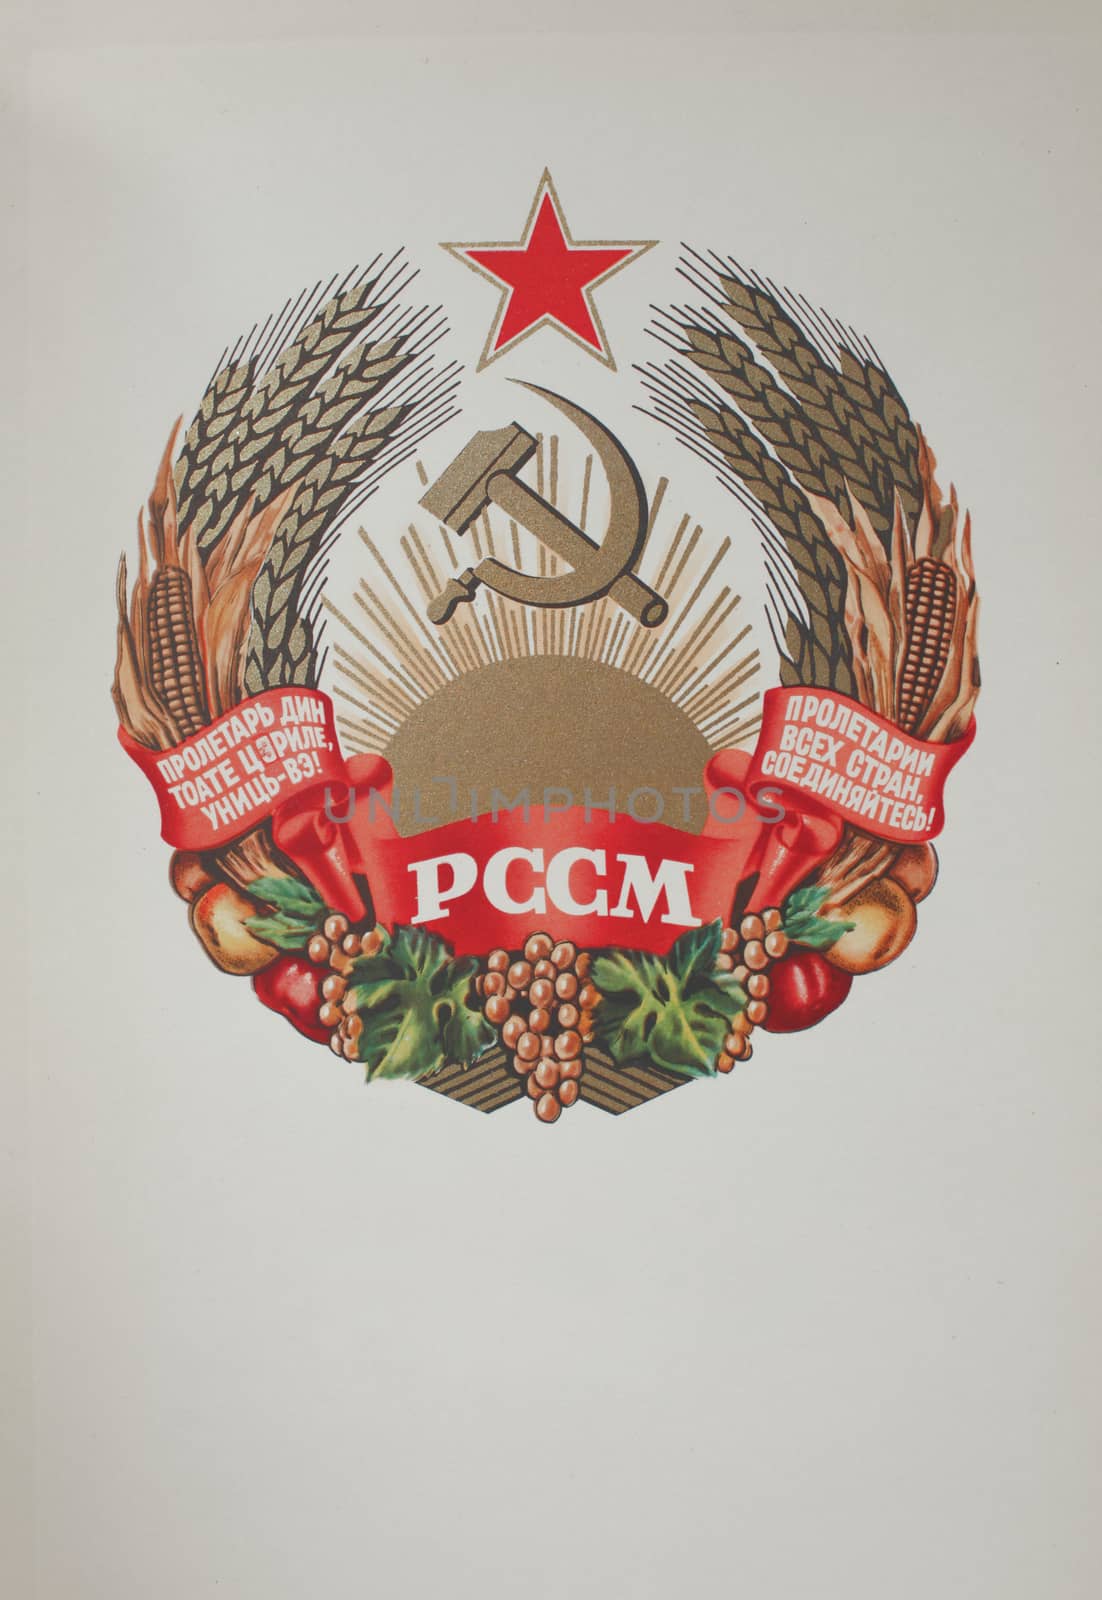 big red star, slogan proletarians of all countries unite,  coat of arms of Moldavian under USSR